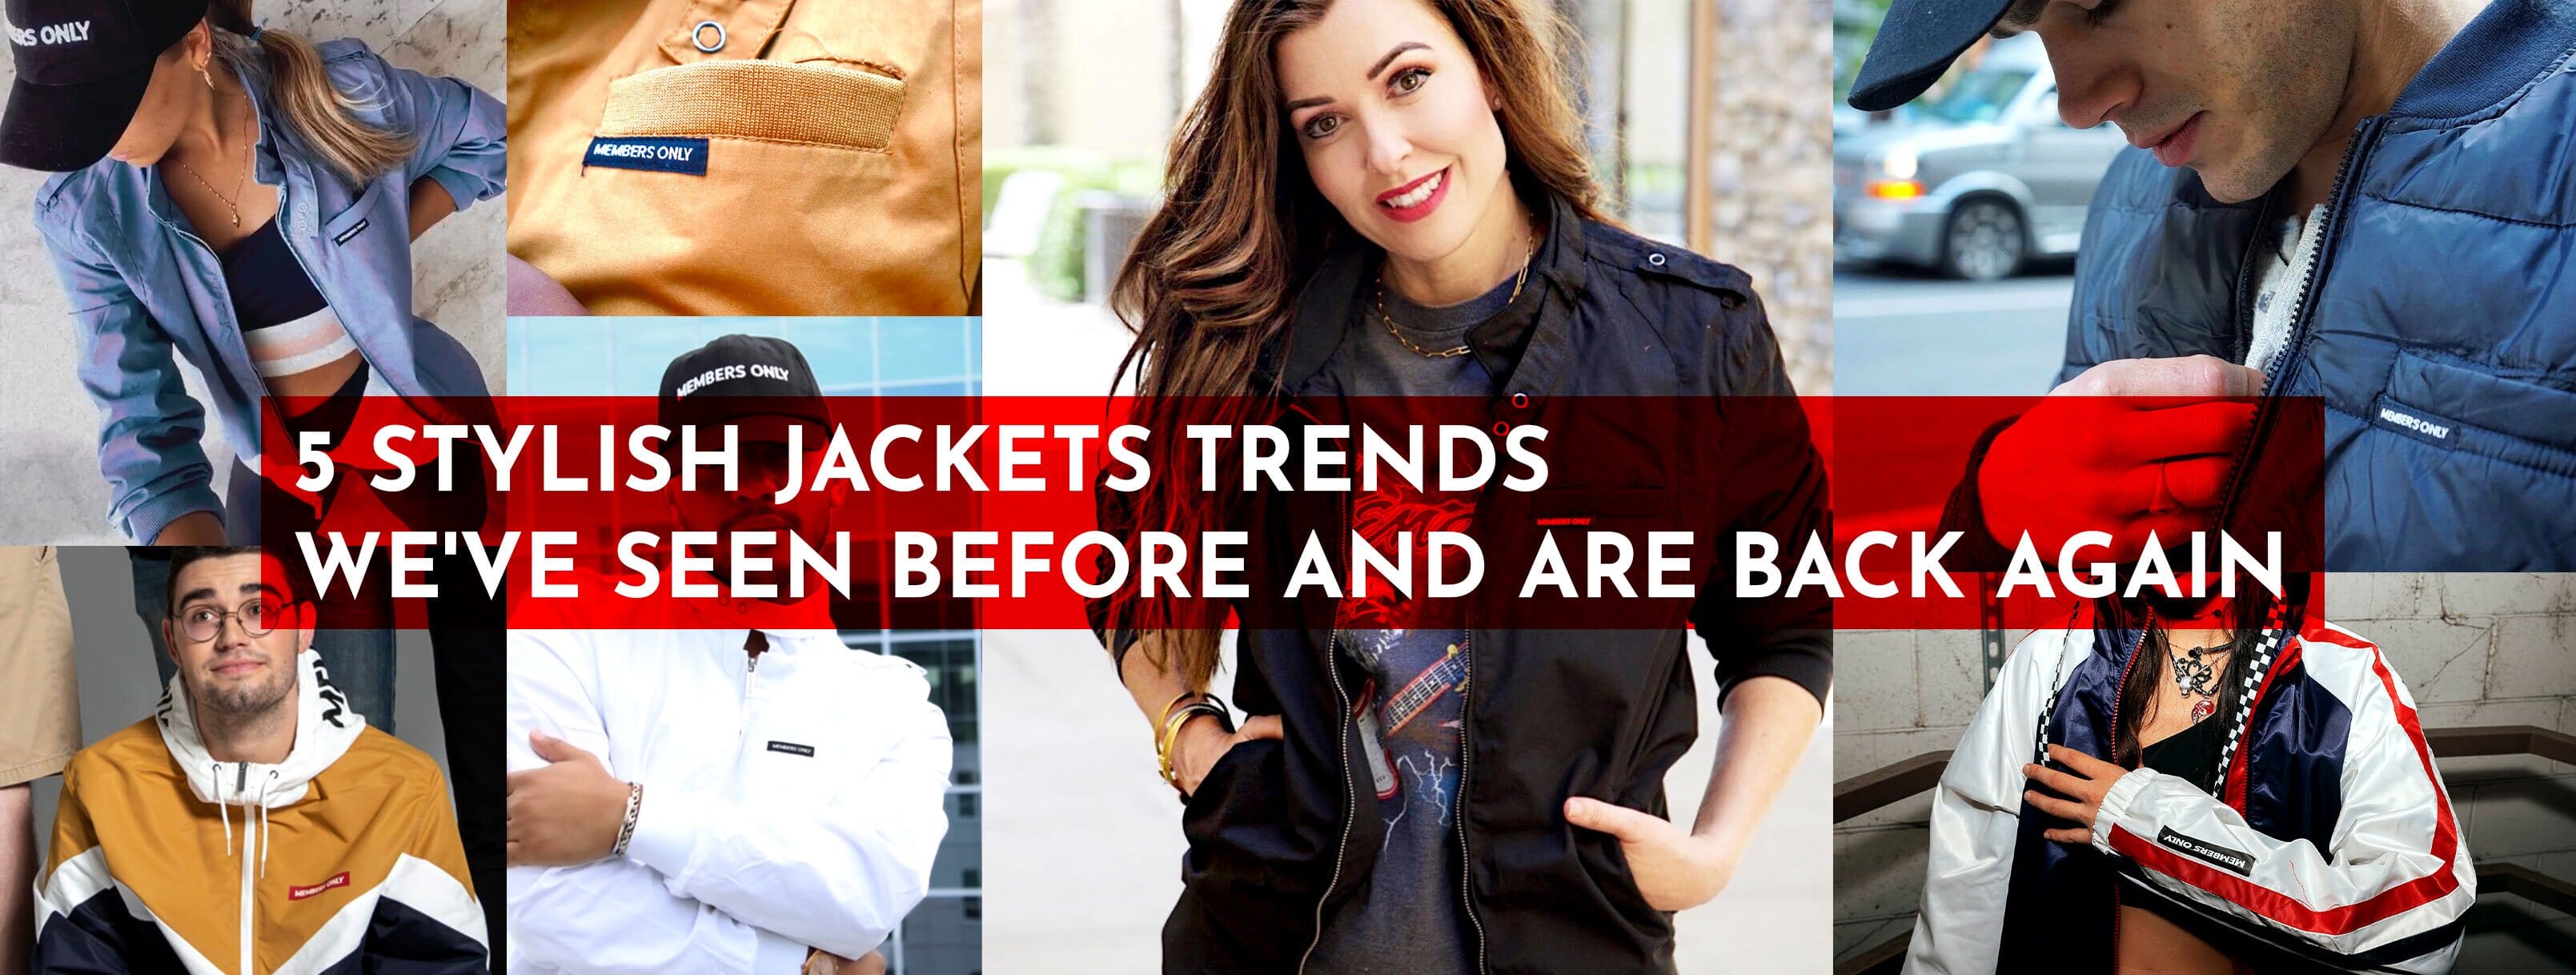 5 Stylish Jackets Trends We've Seen Before and Are Back Again